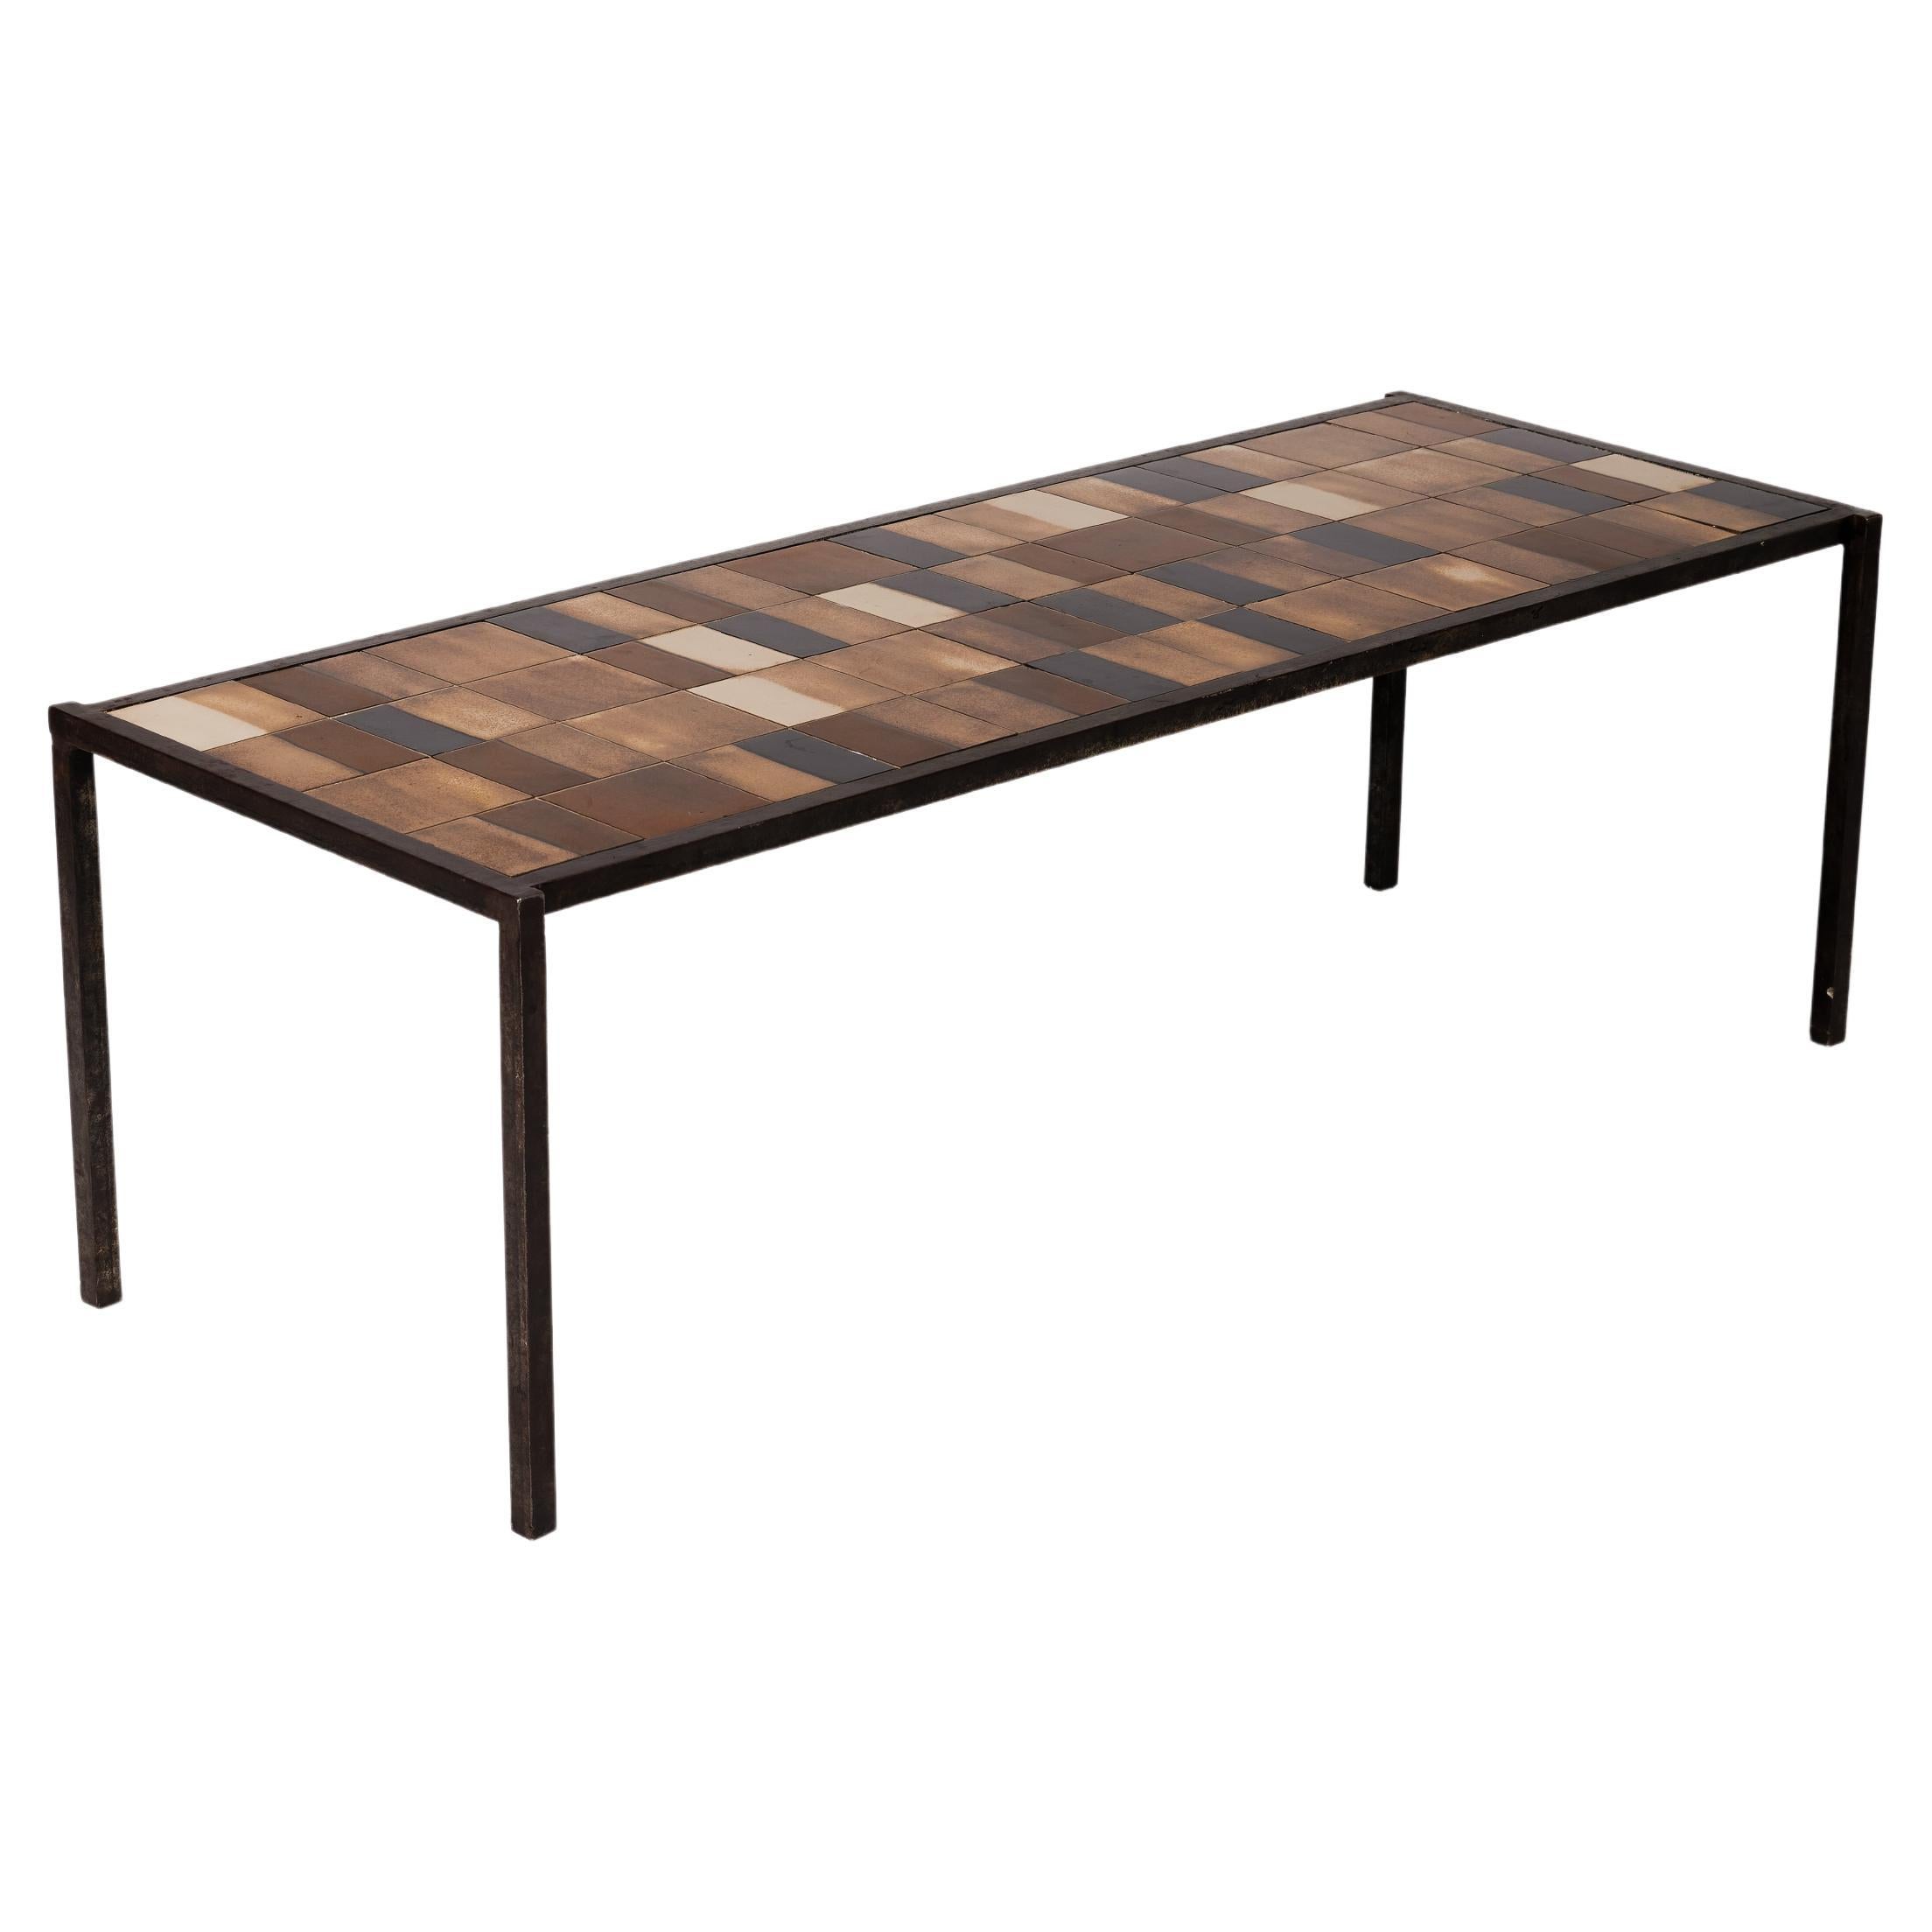 Ceramic coffee table by Mado Jolain & Ren Legrand For Sale